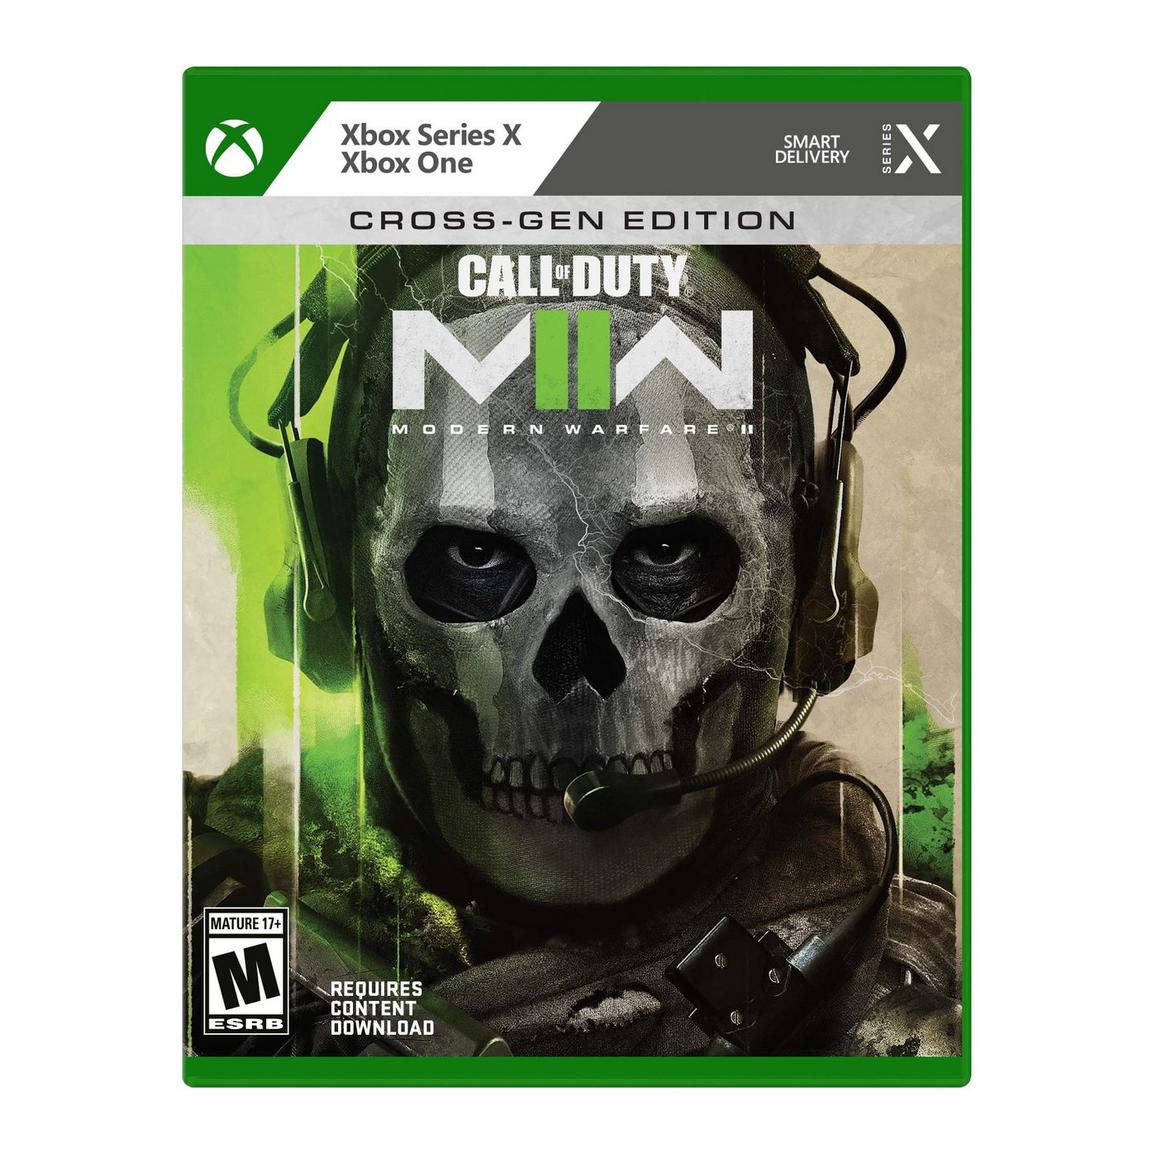 Call of Duty: Modern Warfare II Cross-Gen Bundle - Xbox One and Xbox Series X/S, Pre-Owned -  Activision